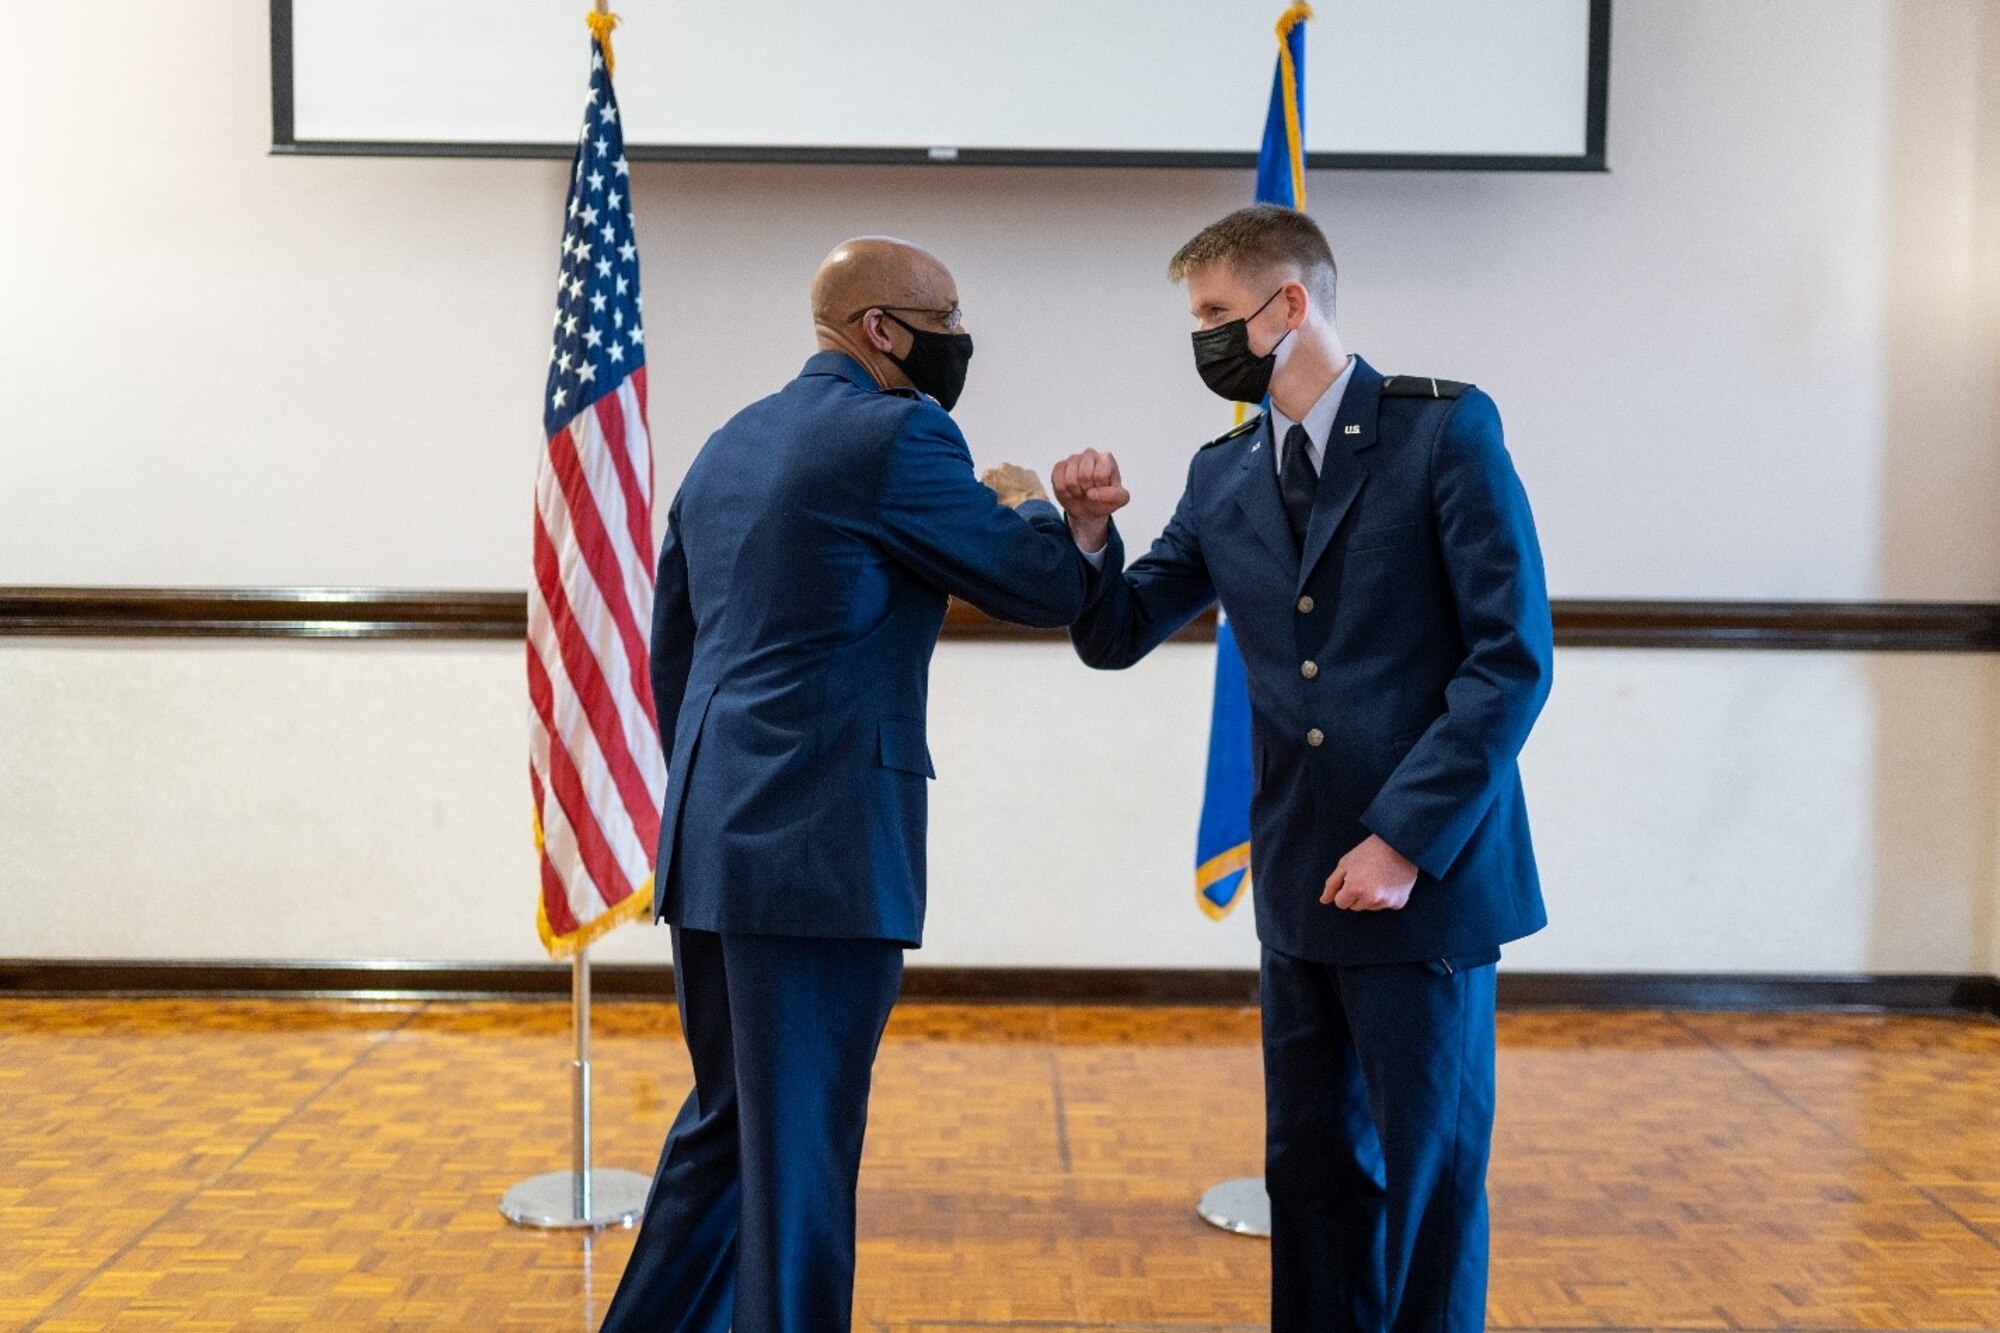 Air Force Chief of Staff Gen. Charles Q. Brown, Jr. presents a coin for excellence to U.S. Air Force
Reserve Officer Training Corps Cadet Hayden VanDeVoorde during a leadership laboratory at Saint
Louis University, St. Louis, Missouri April 28, 2021. Brown visited AFROTC Detachment 207 to speak
with cadets about preparing for challenges they will face as future officers. (U.S. Air Force photo by Cadet
Phillip Casey)